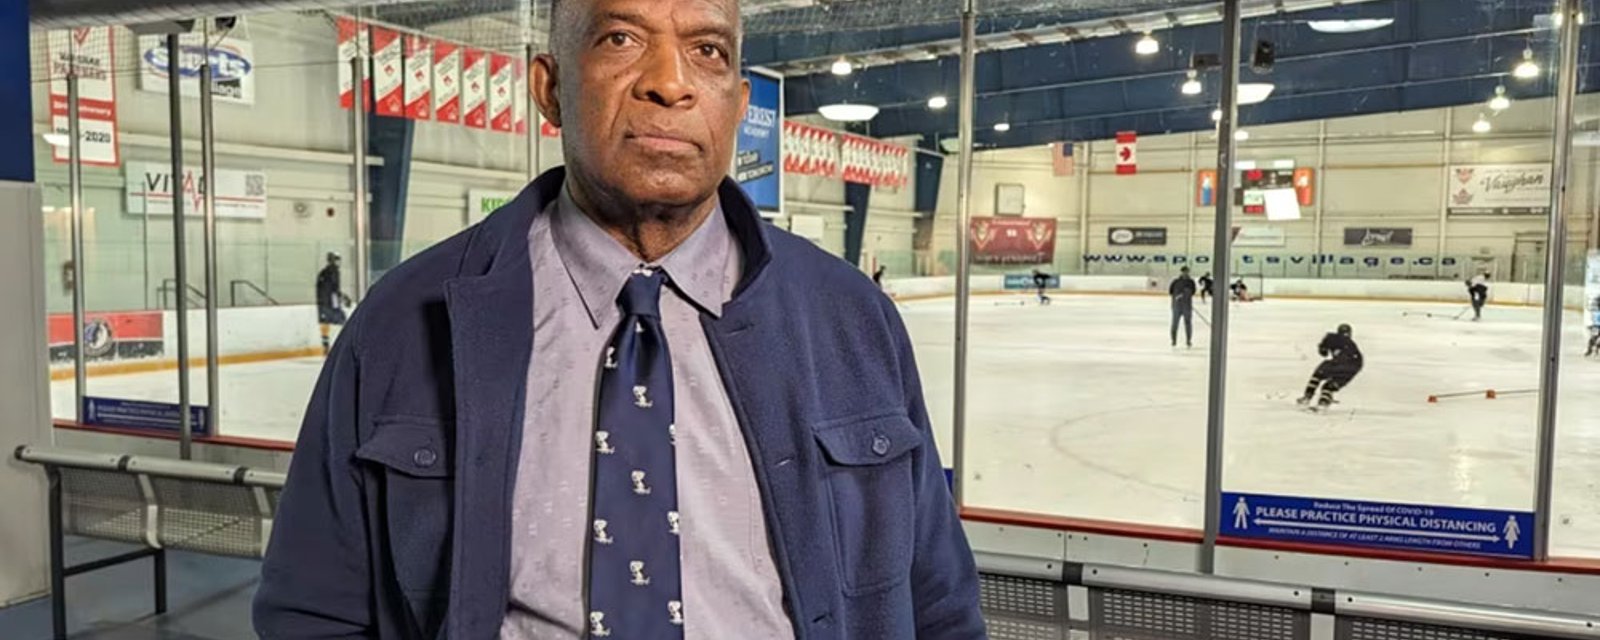 PK Subban's father trying to get gambling ads banned from NHL games